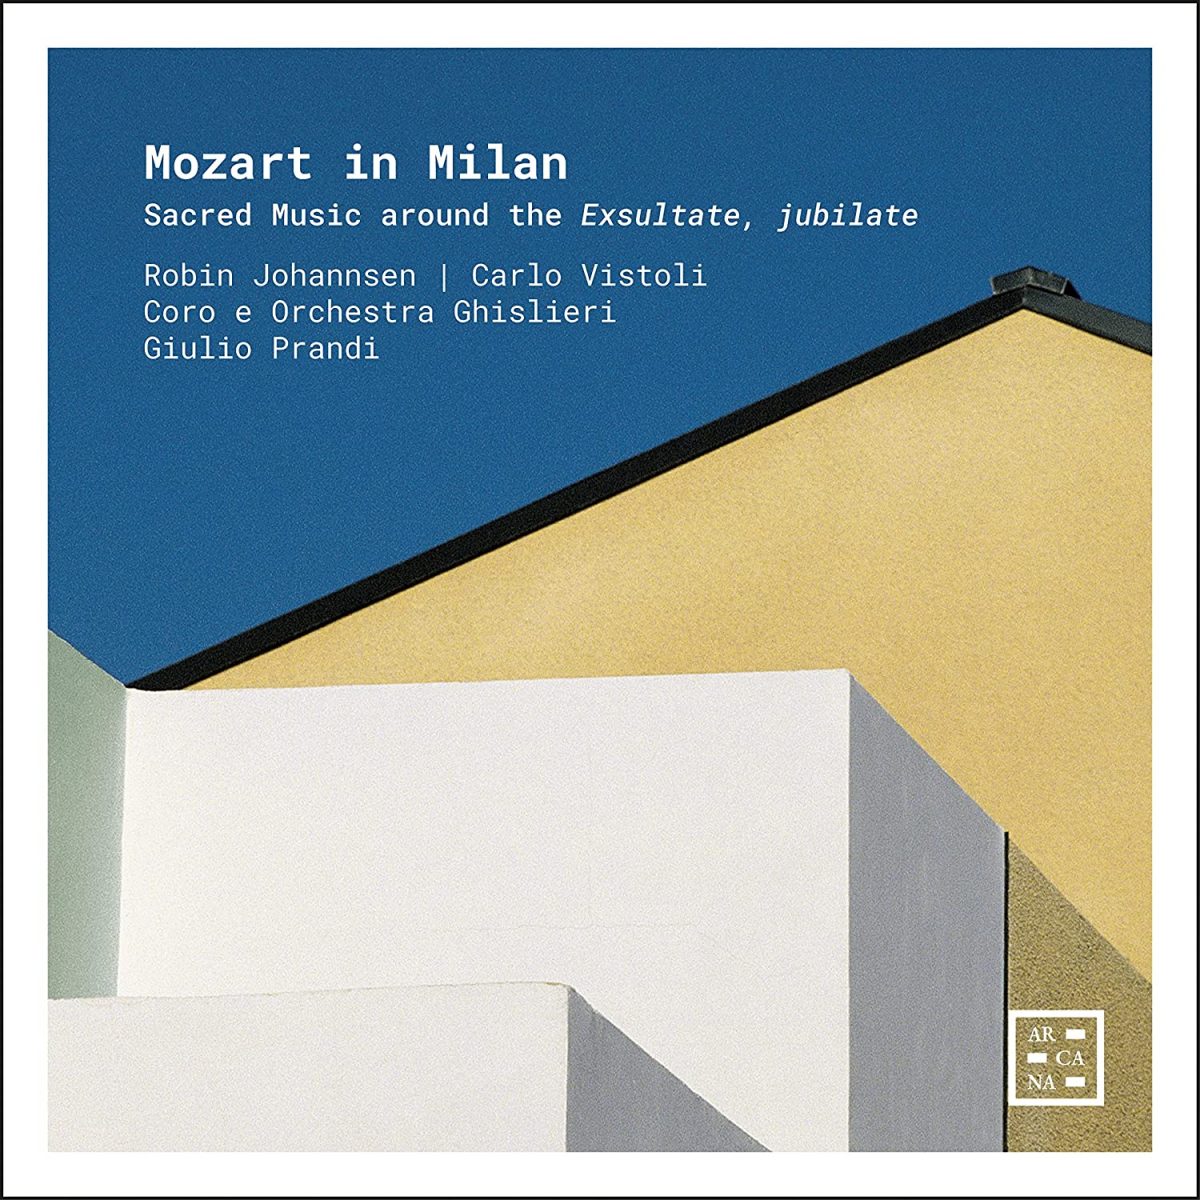 CD cover of Mozart in Milan